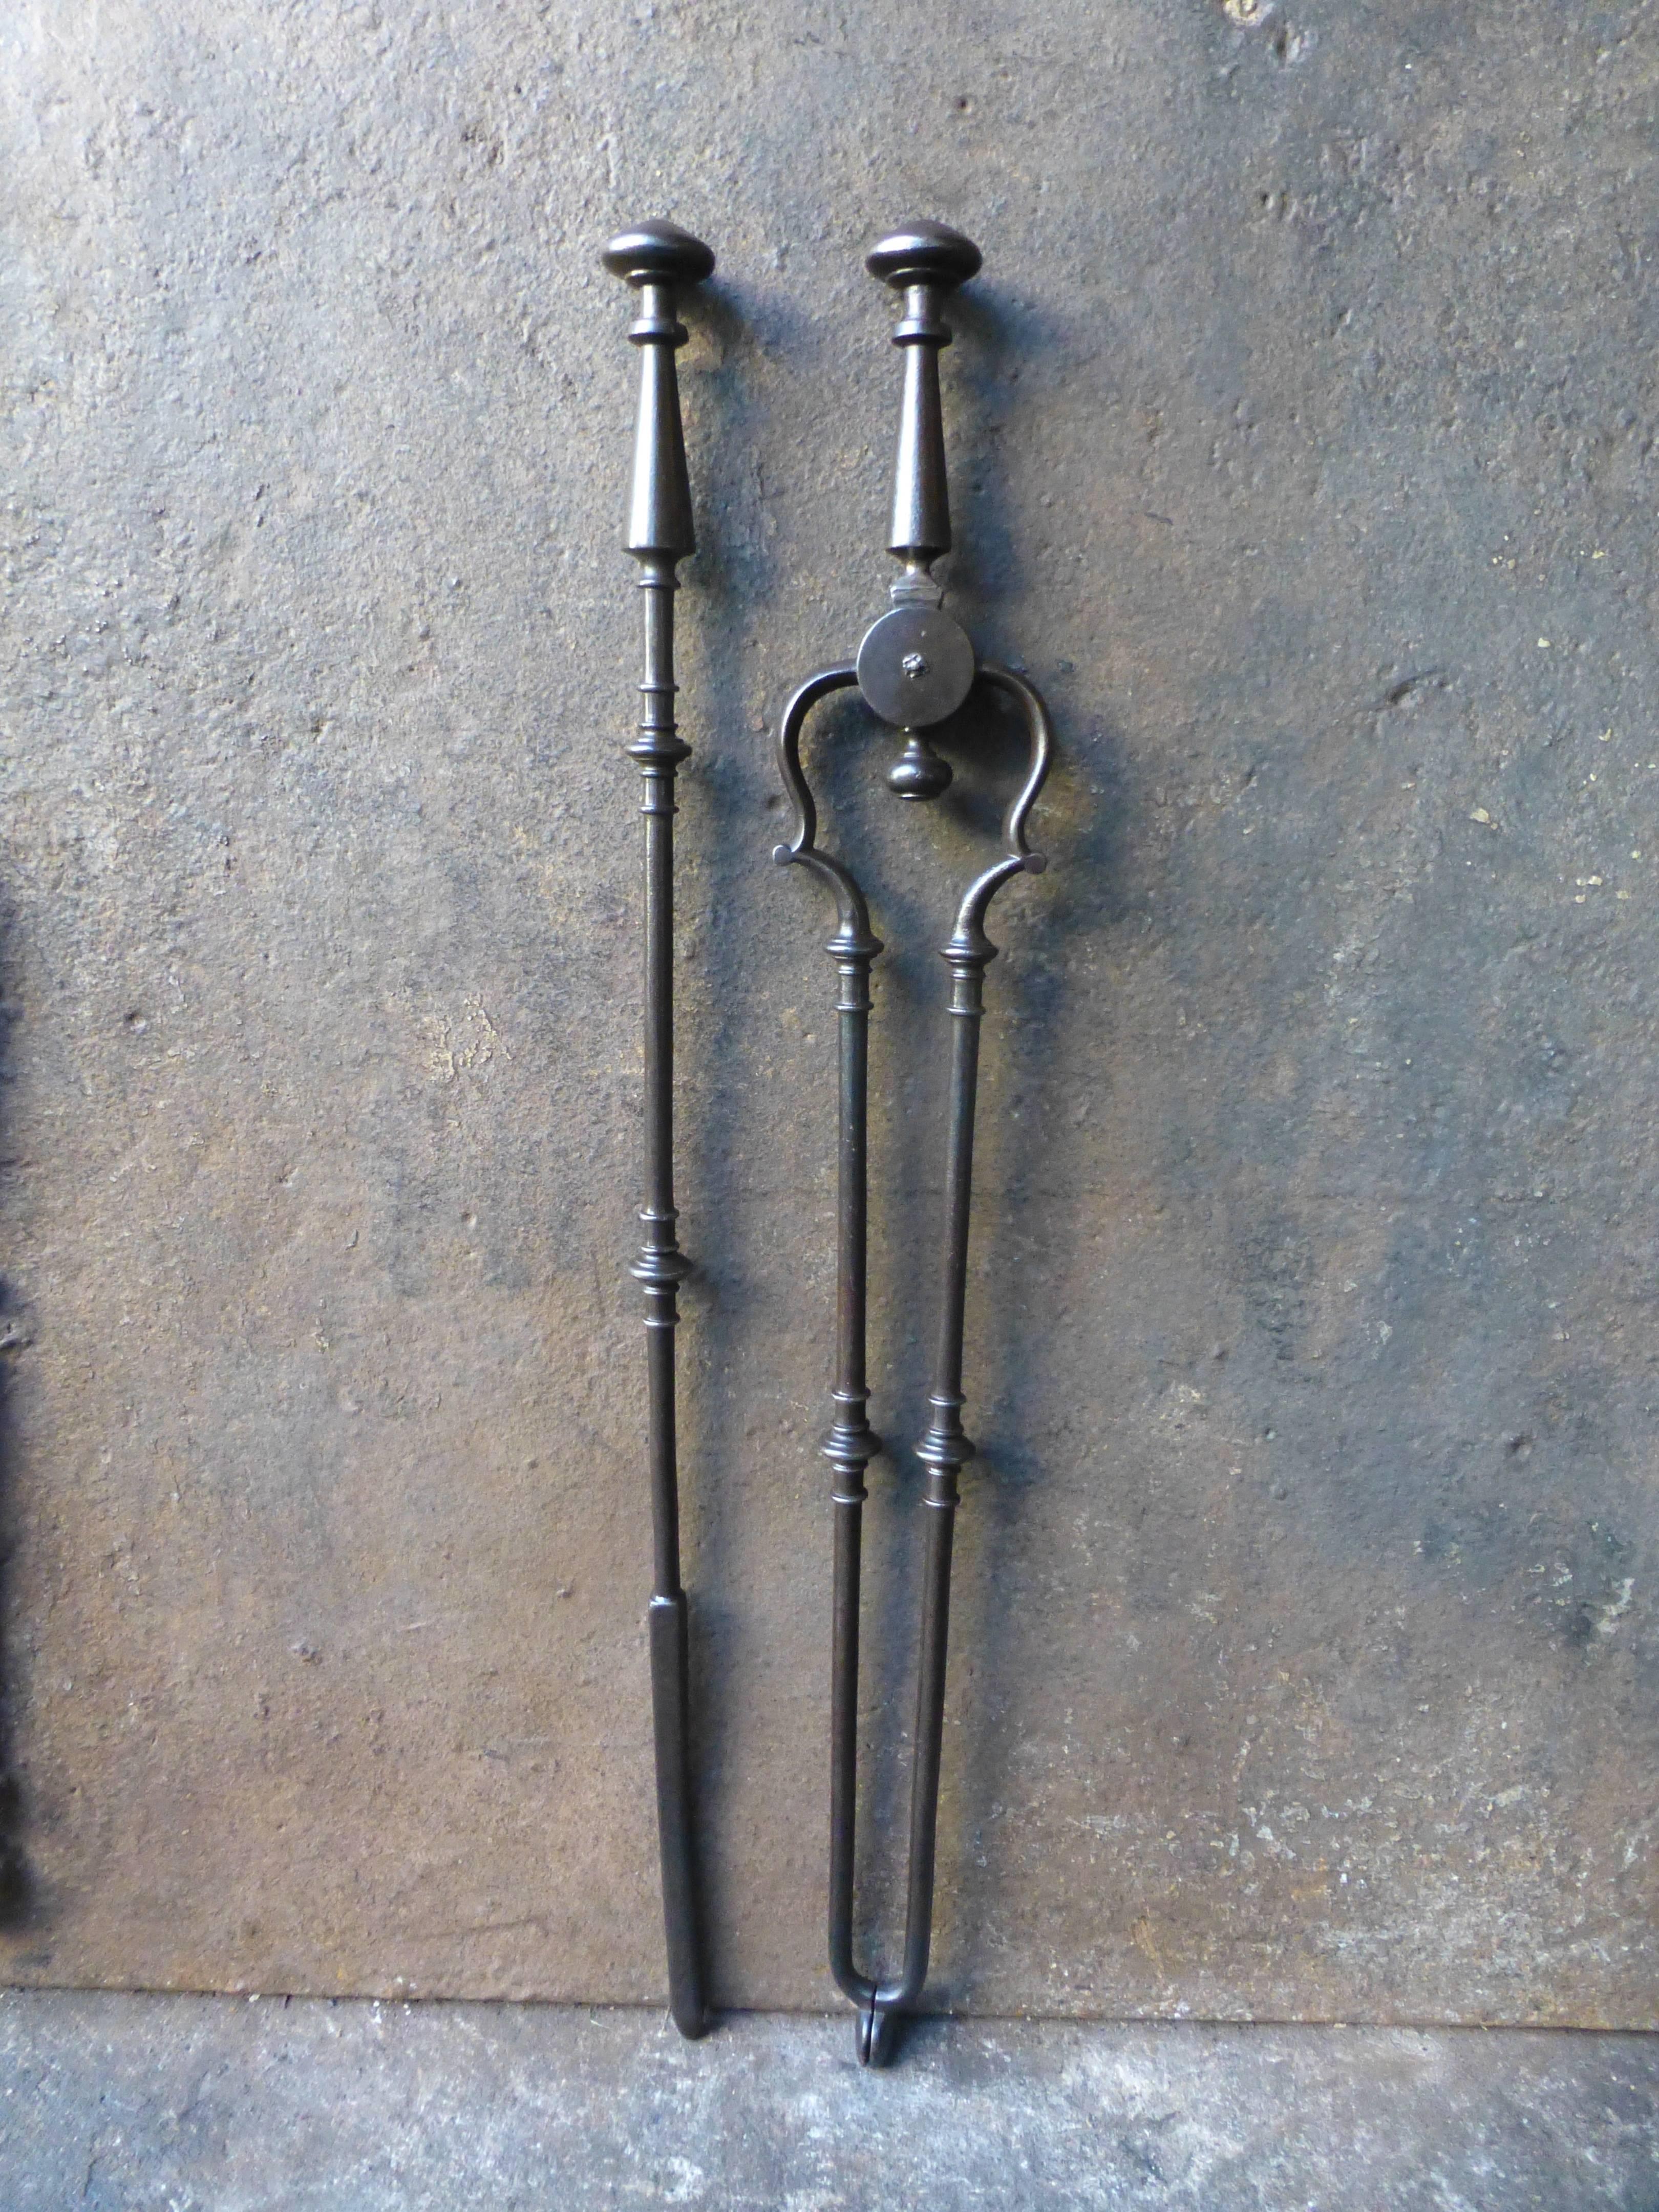 19th century English fire irons or fireside irons.